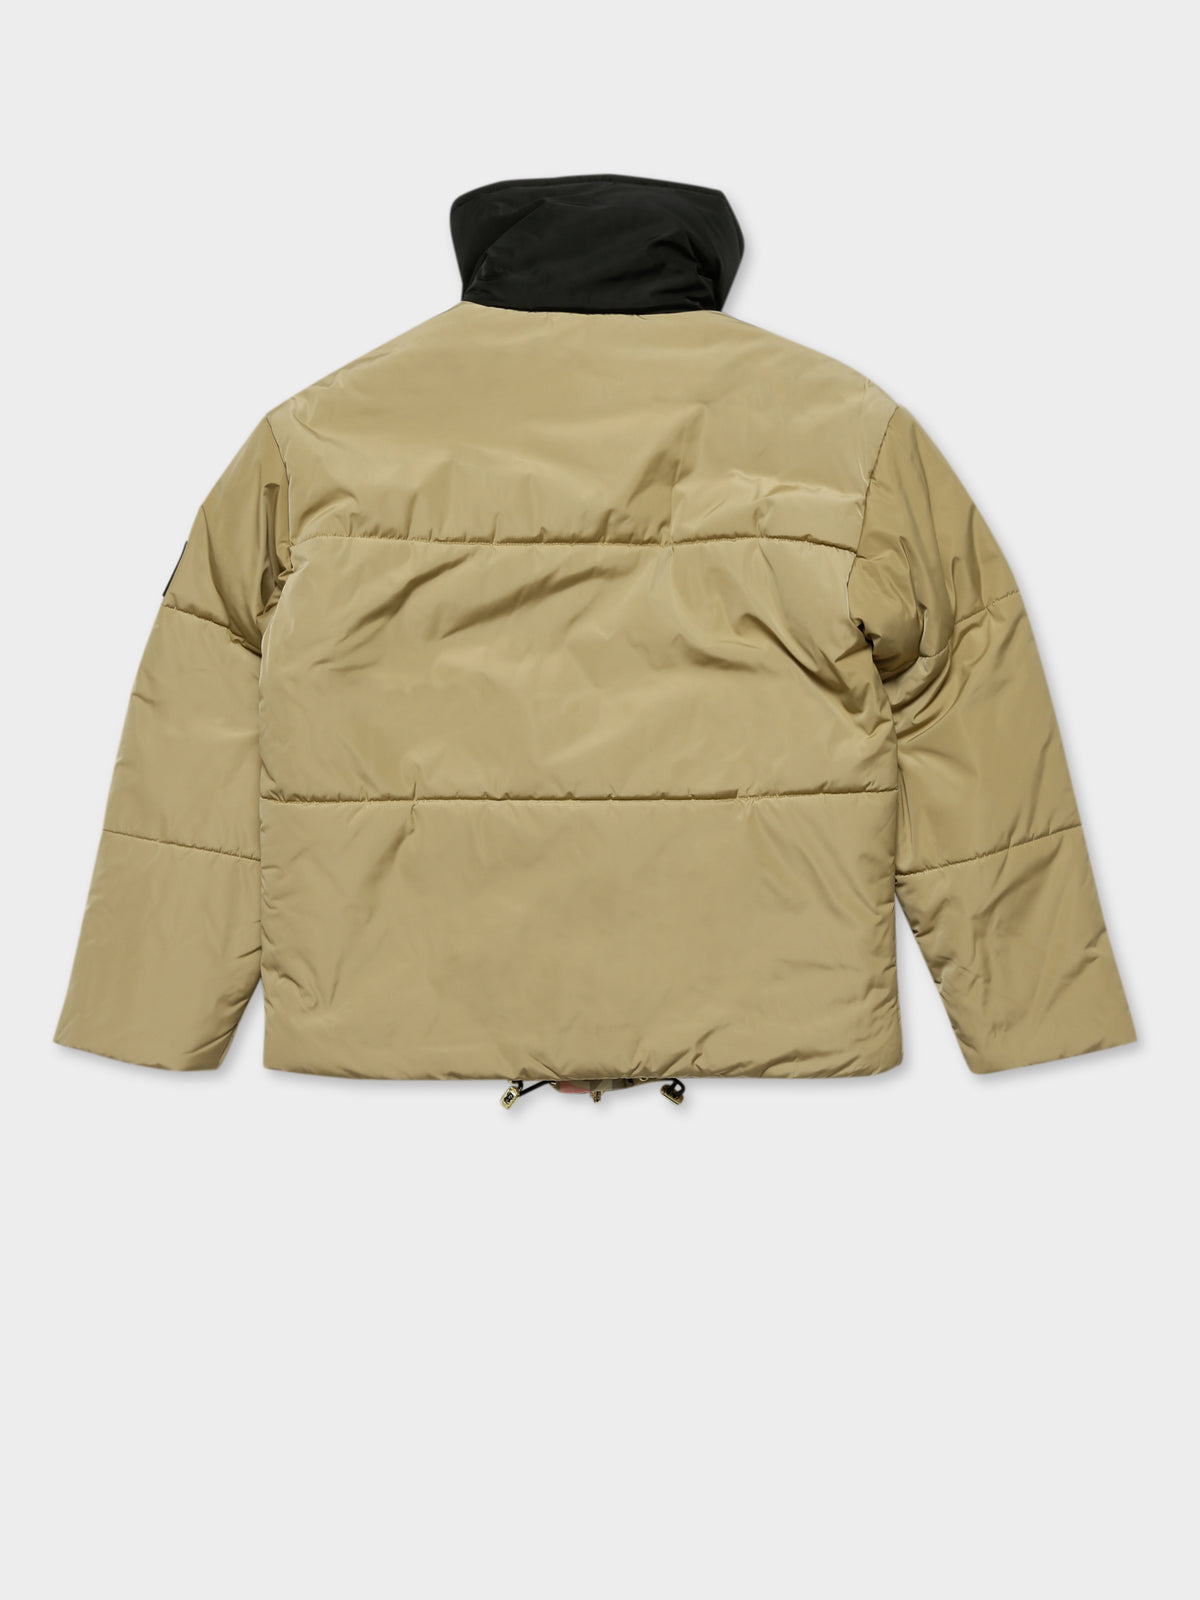 Combat Jacket in Olive Gray